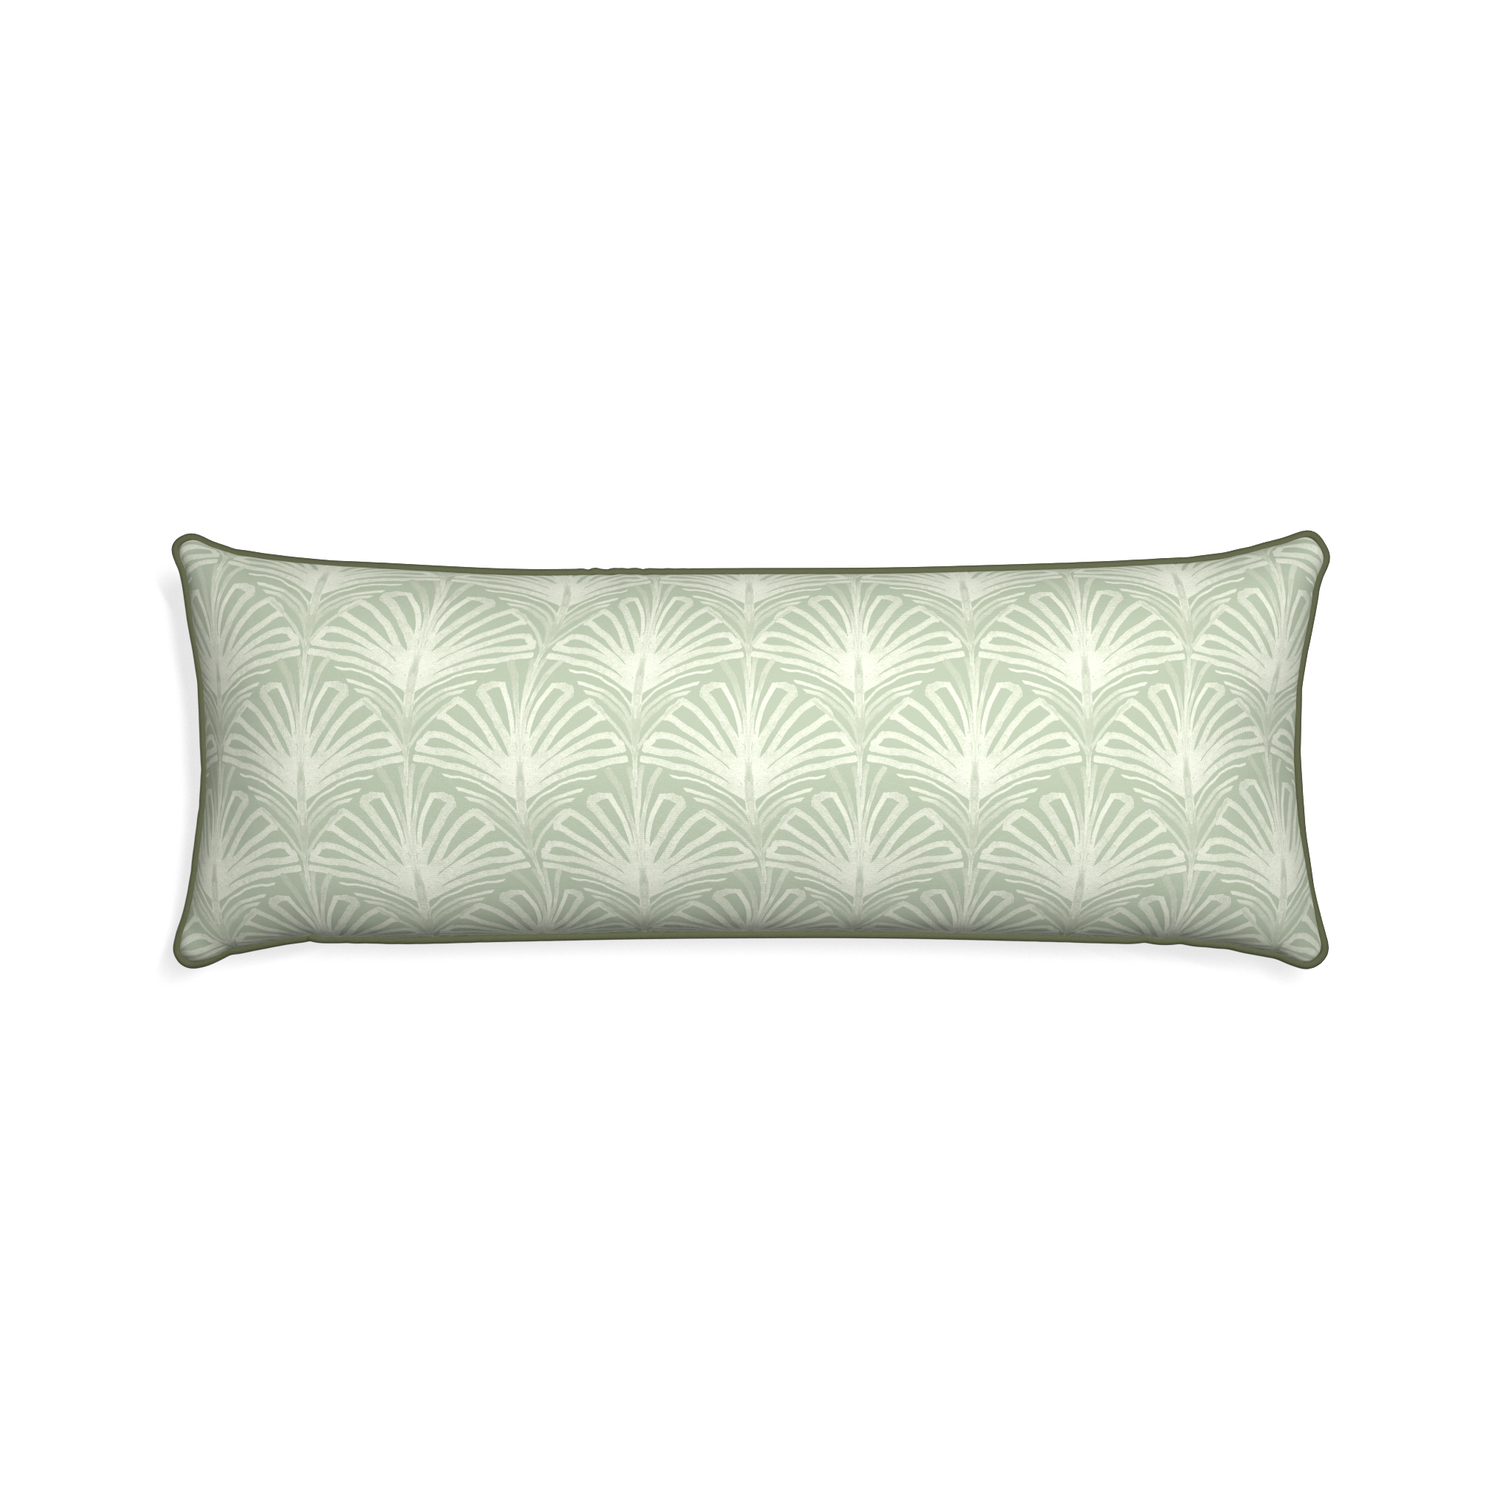 Xl-lumbar suzy sage custom sage green palmpillow with f piping on white background